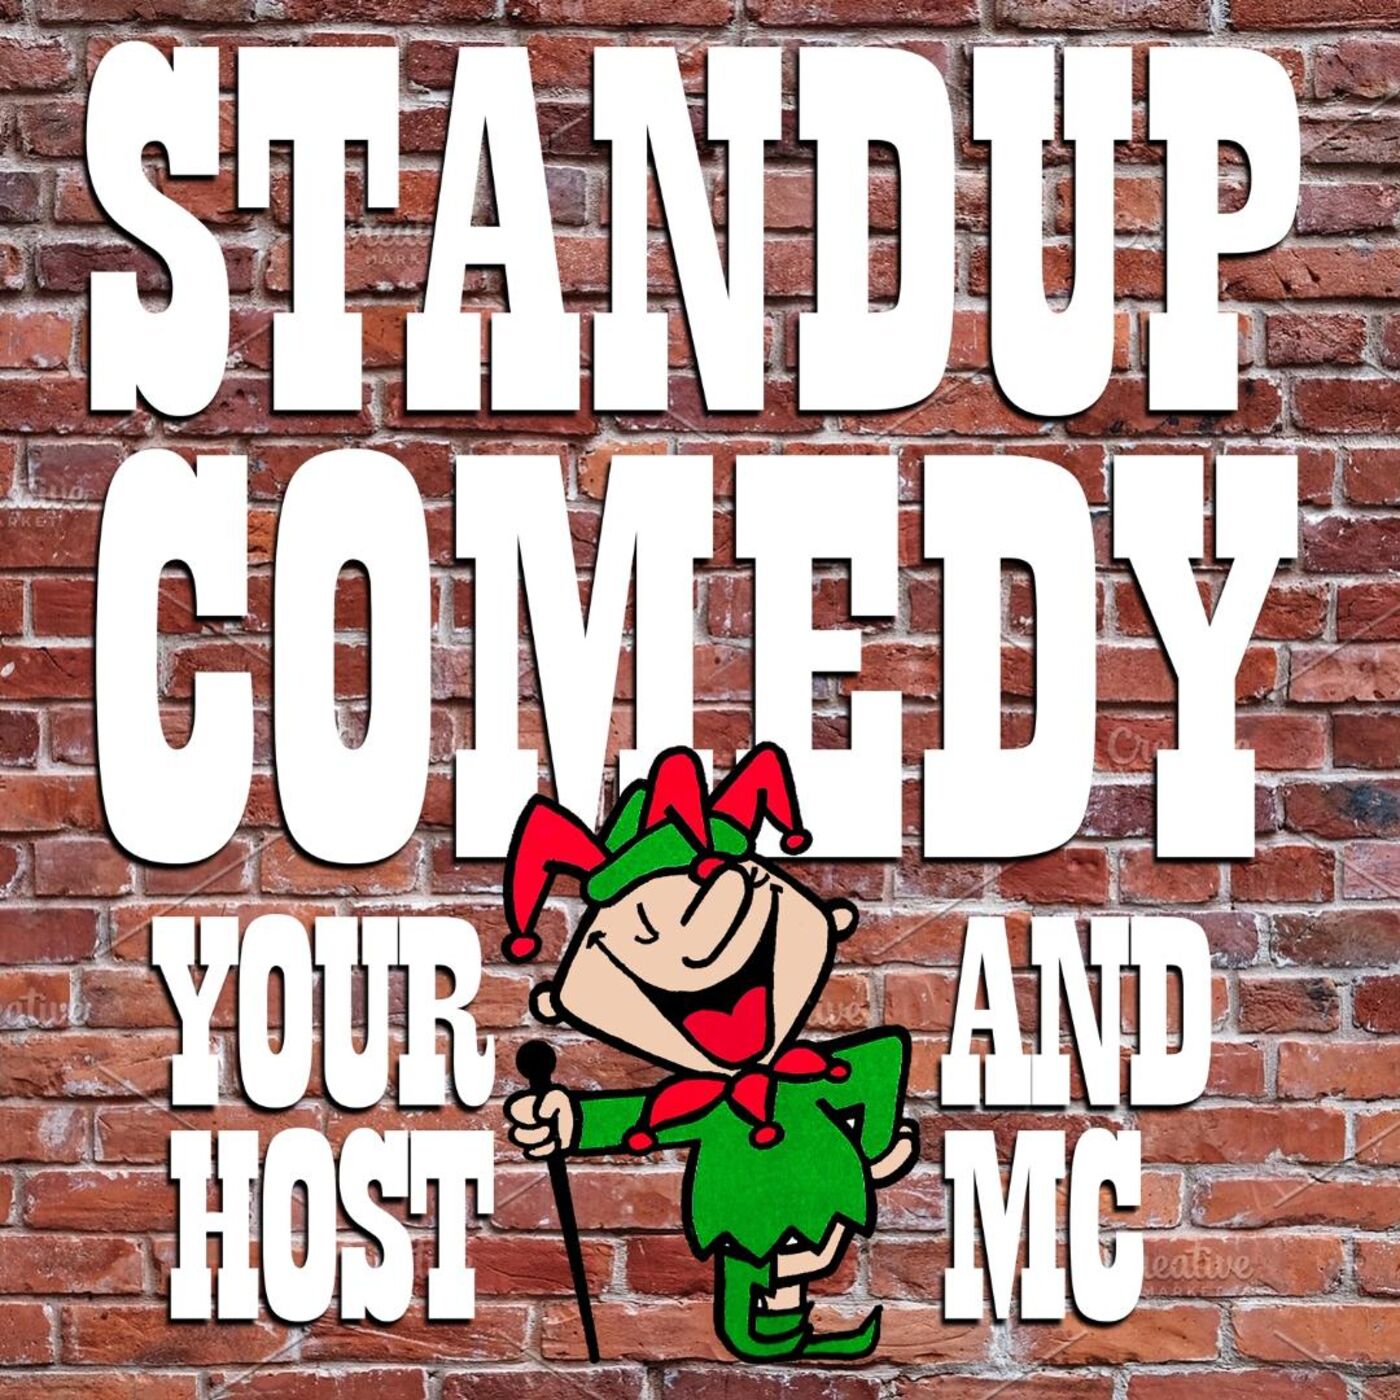  Standup Comedy "Laughs" TV Show Lineup 1987  Mike Baily, Nicky Shane & Tim O'Rourke  Show #87 - burst 1